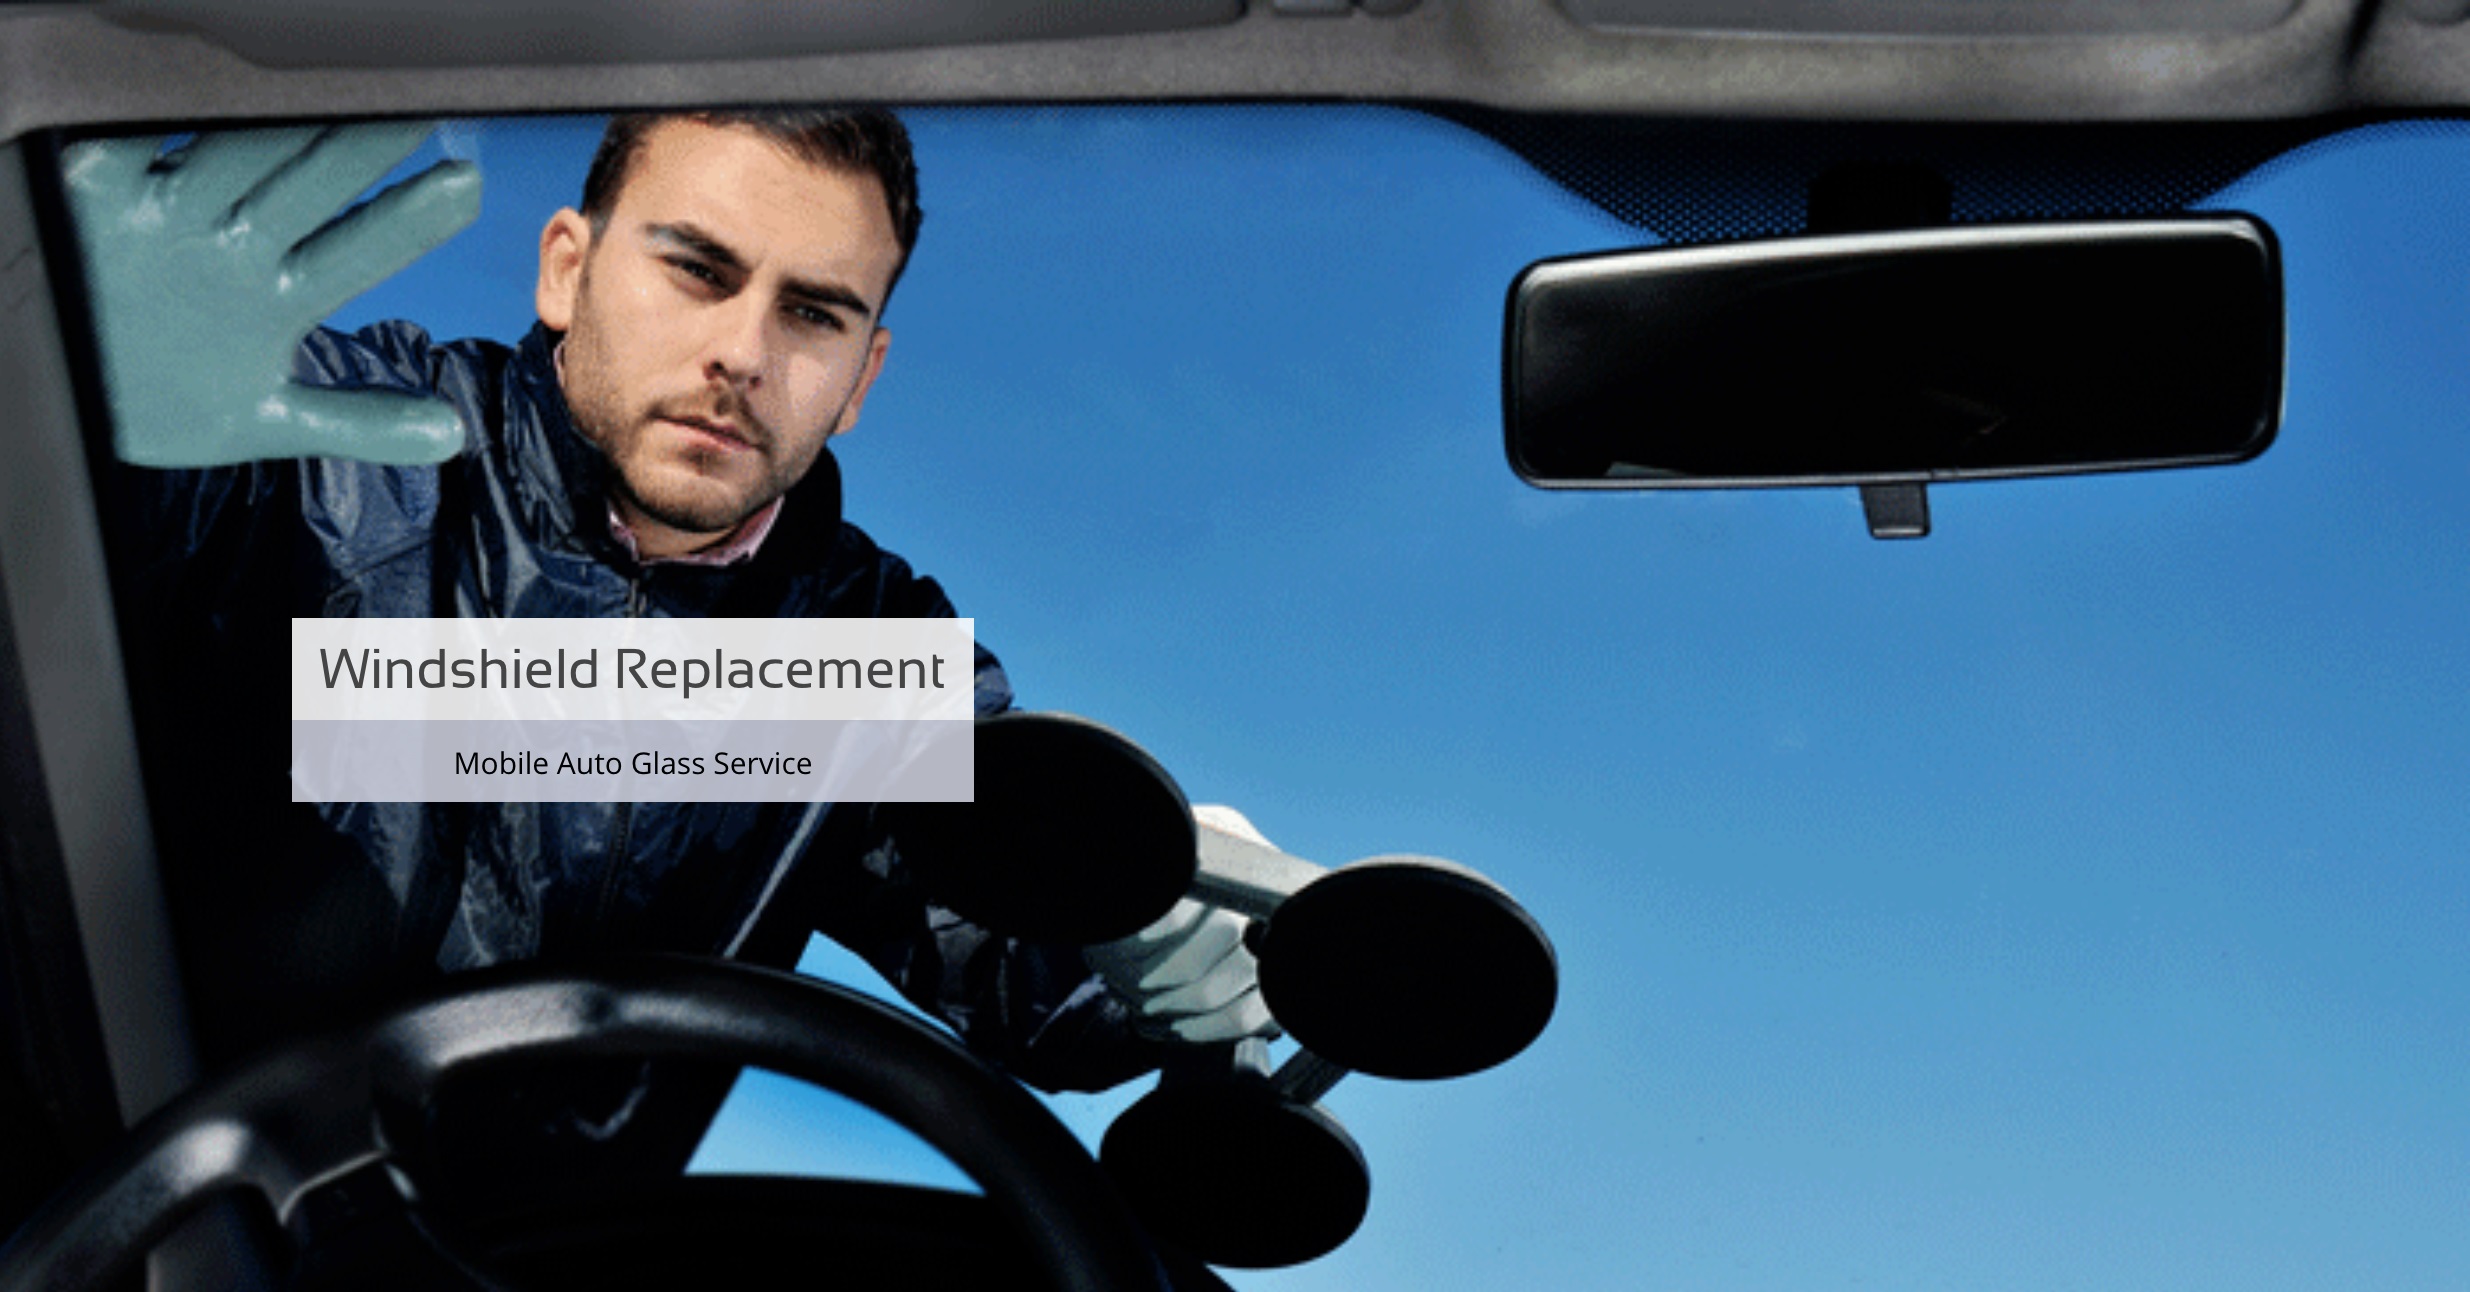 Marina del Rey Auto Glass Repair and replace